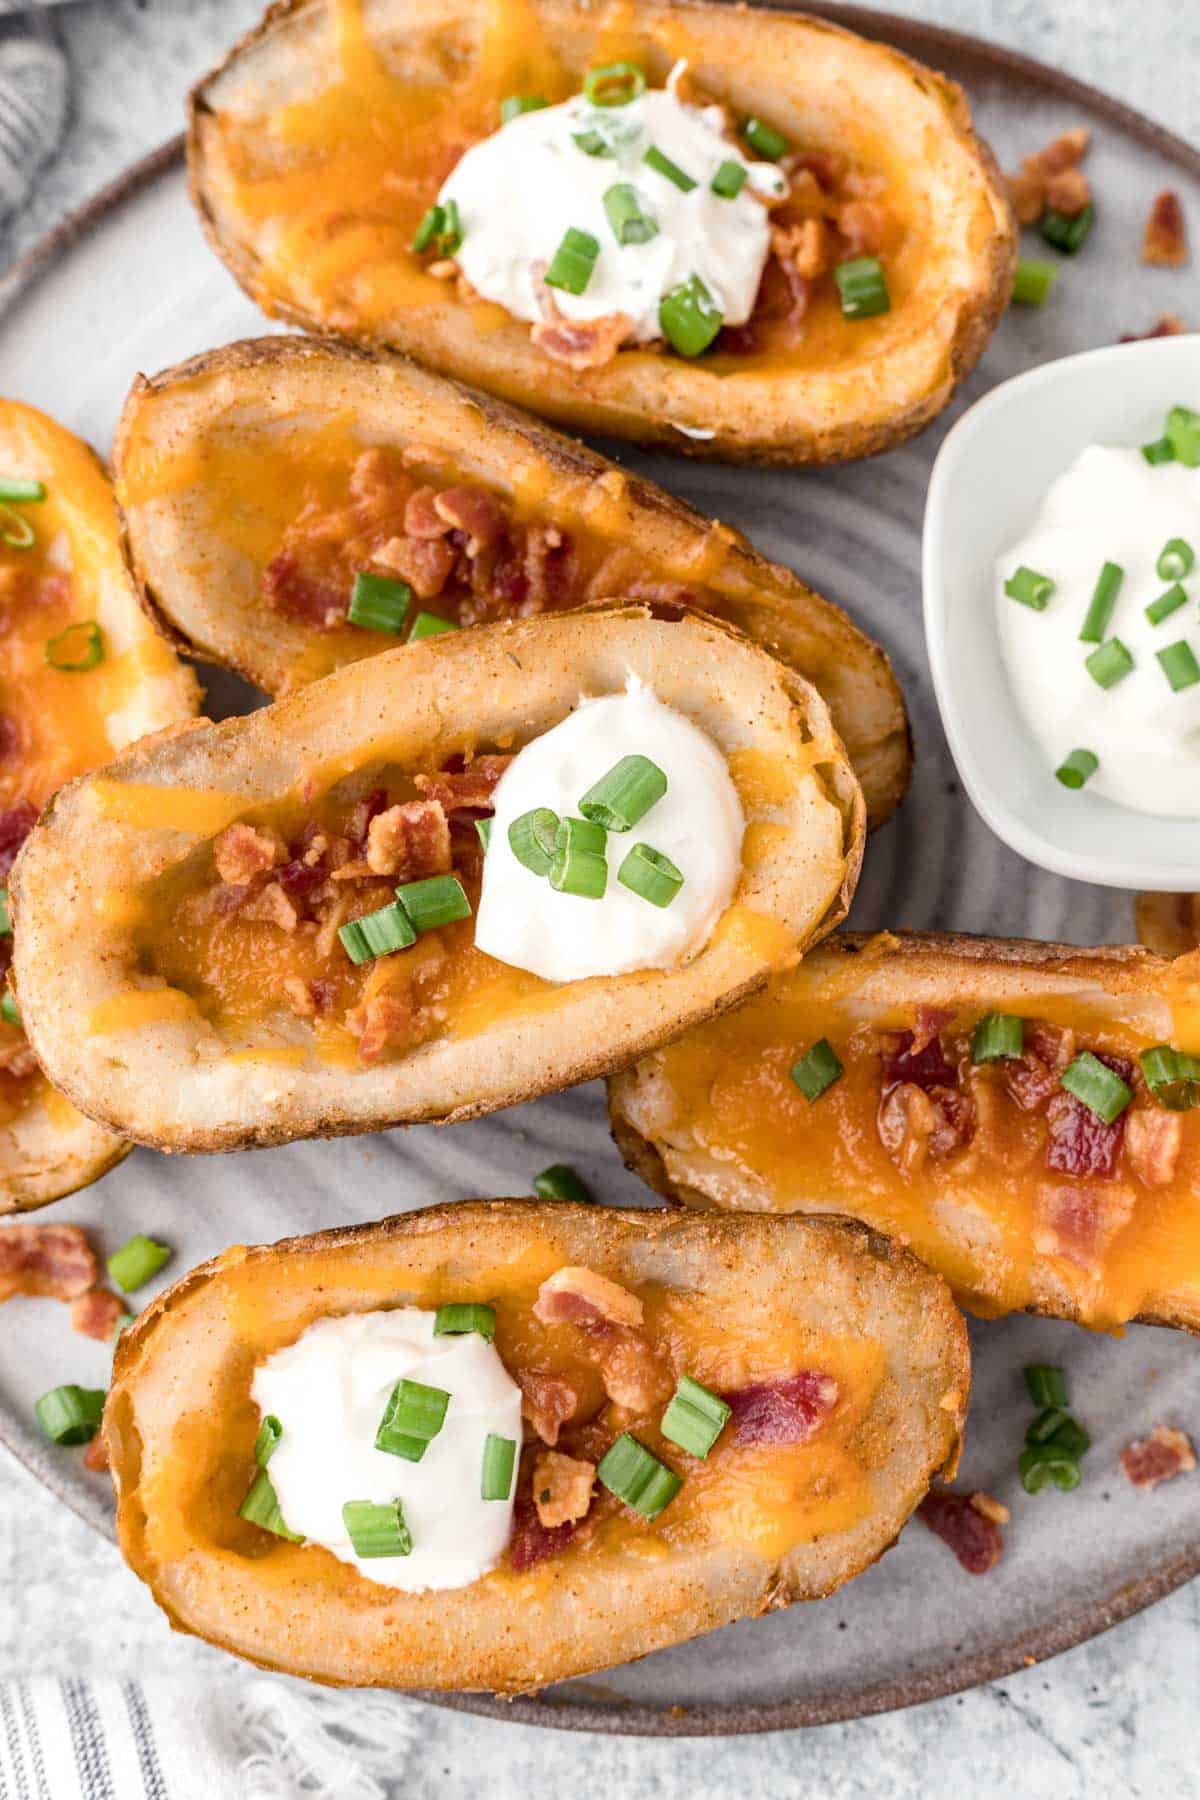 A plate full of loaded potato skins with sour cream for dipping.